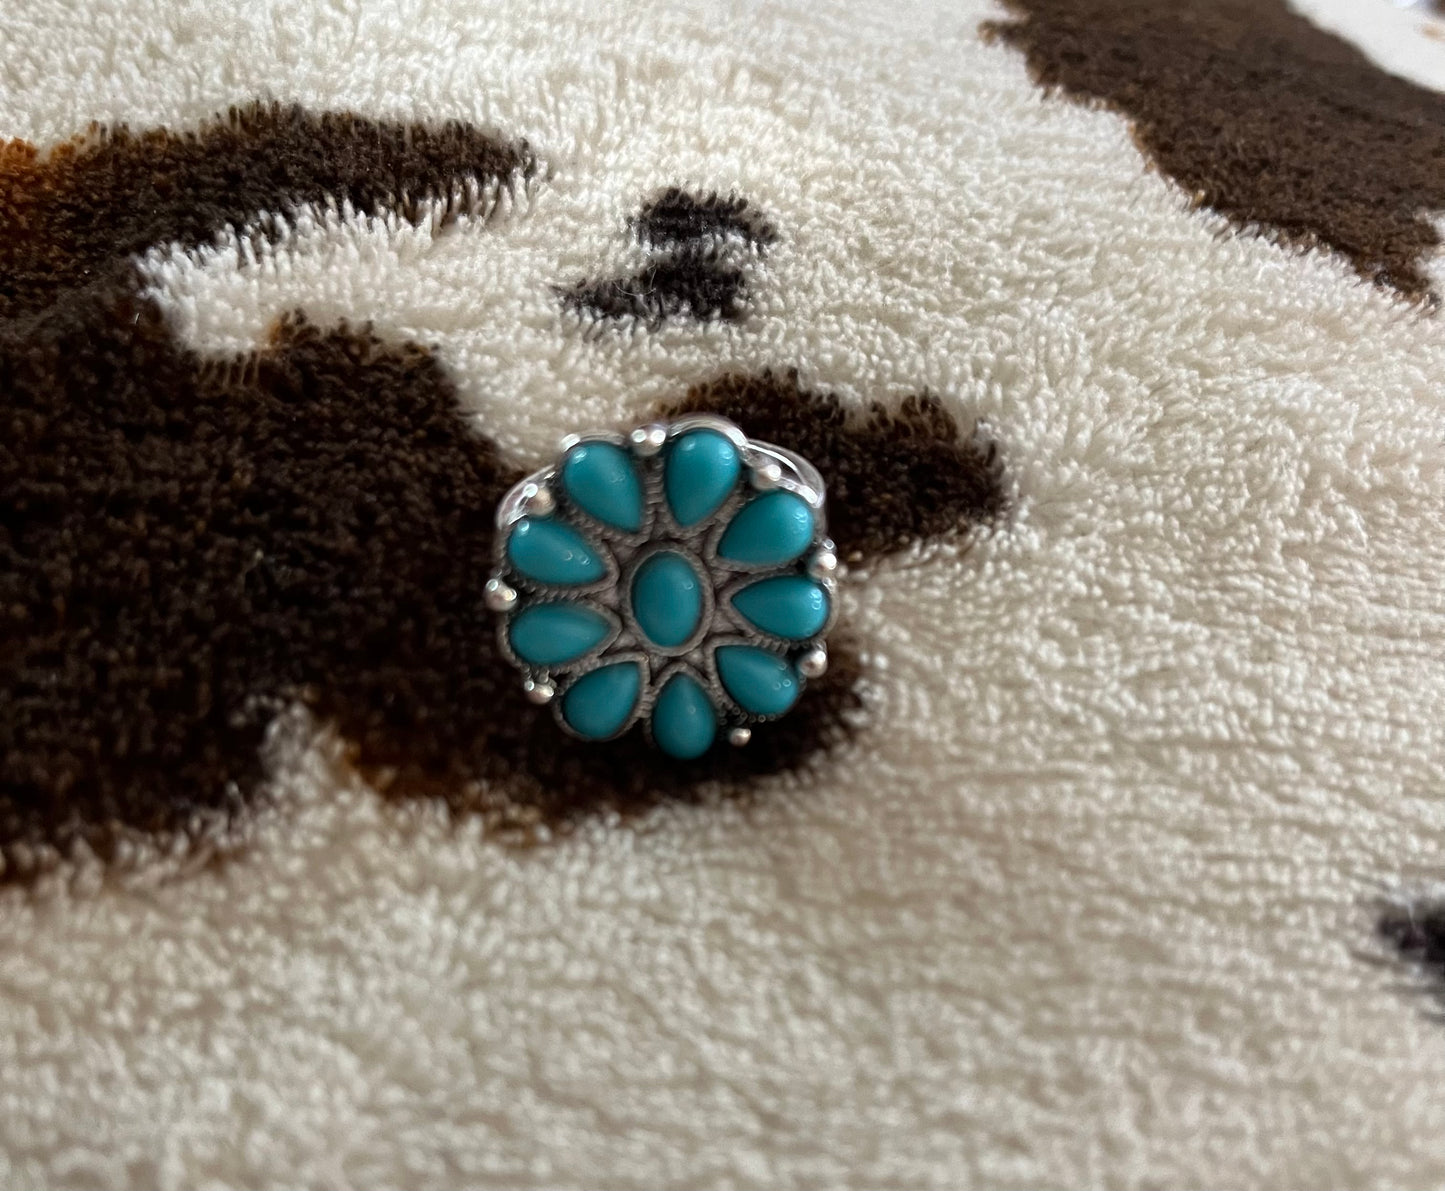 Turquoise Flower Shaped Ring